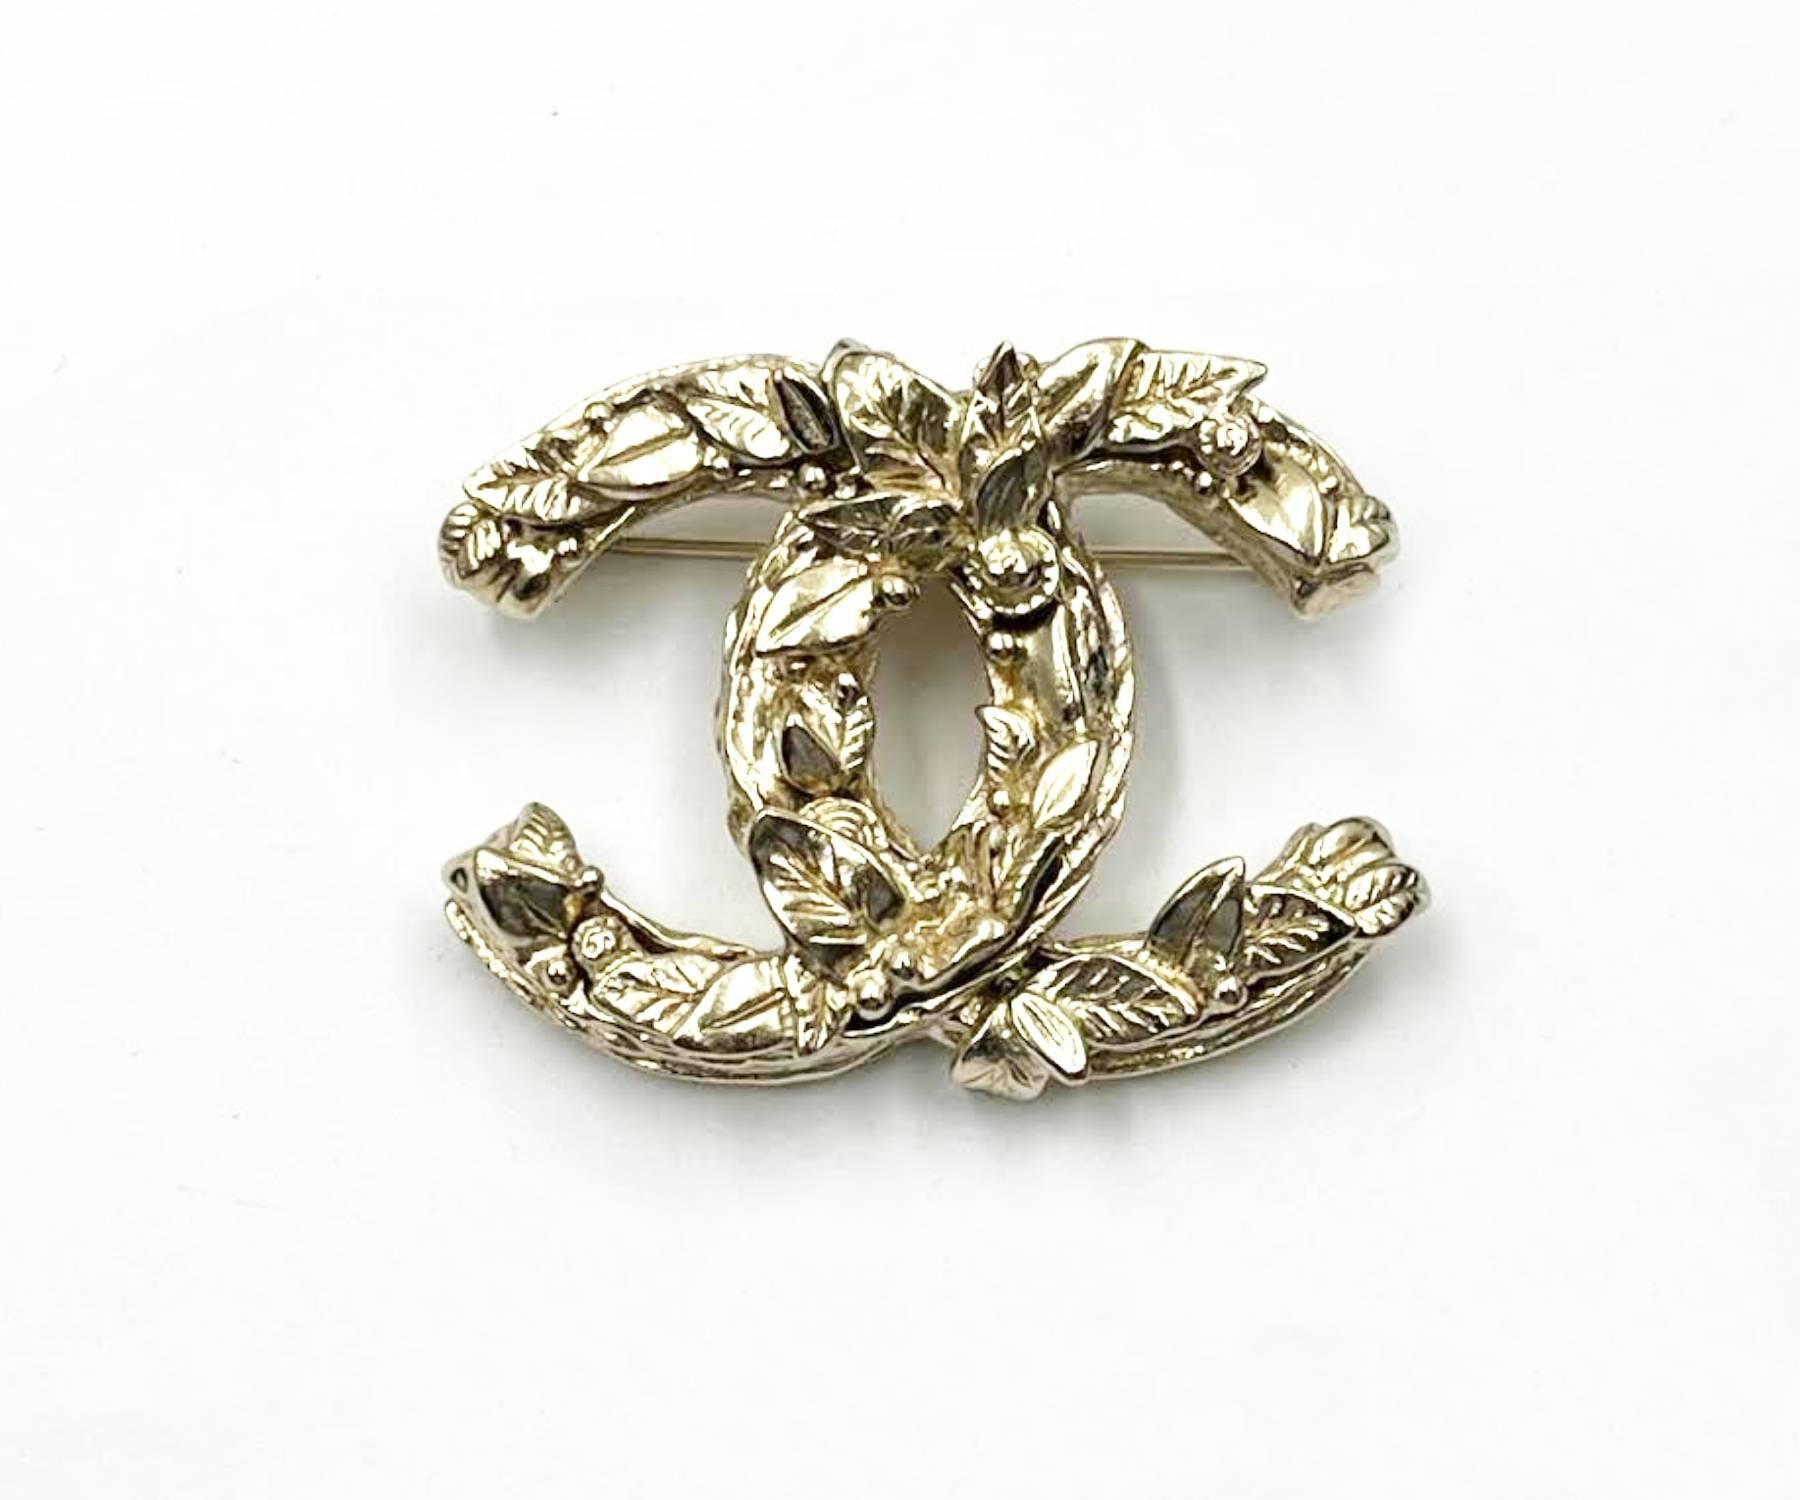 Chanel Gold CC Golden Leaves Brooch

* Marked 11
* Made in France
* Comes with the original box

-It is approximately 1.25″ x 1.5″.
-Very shiny and pretty

2161-45431

